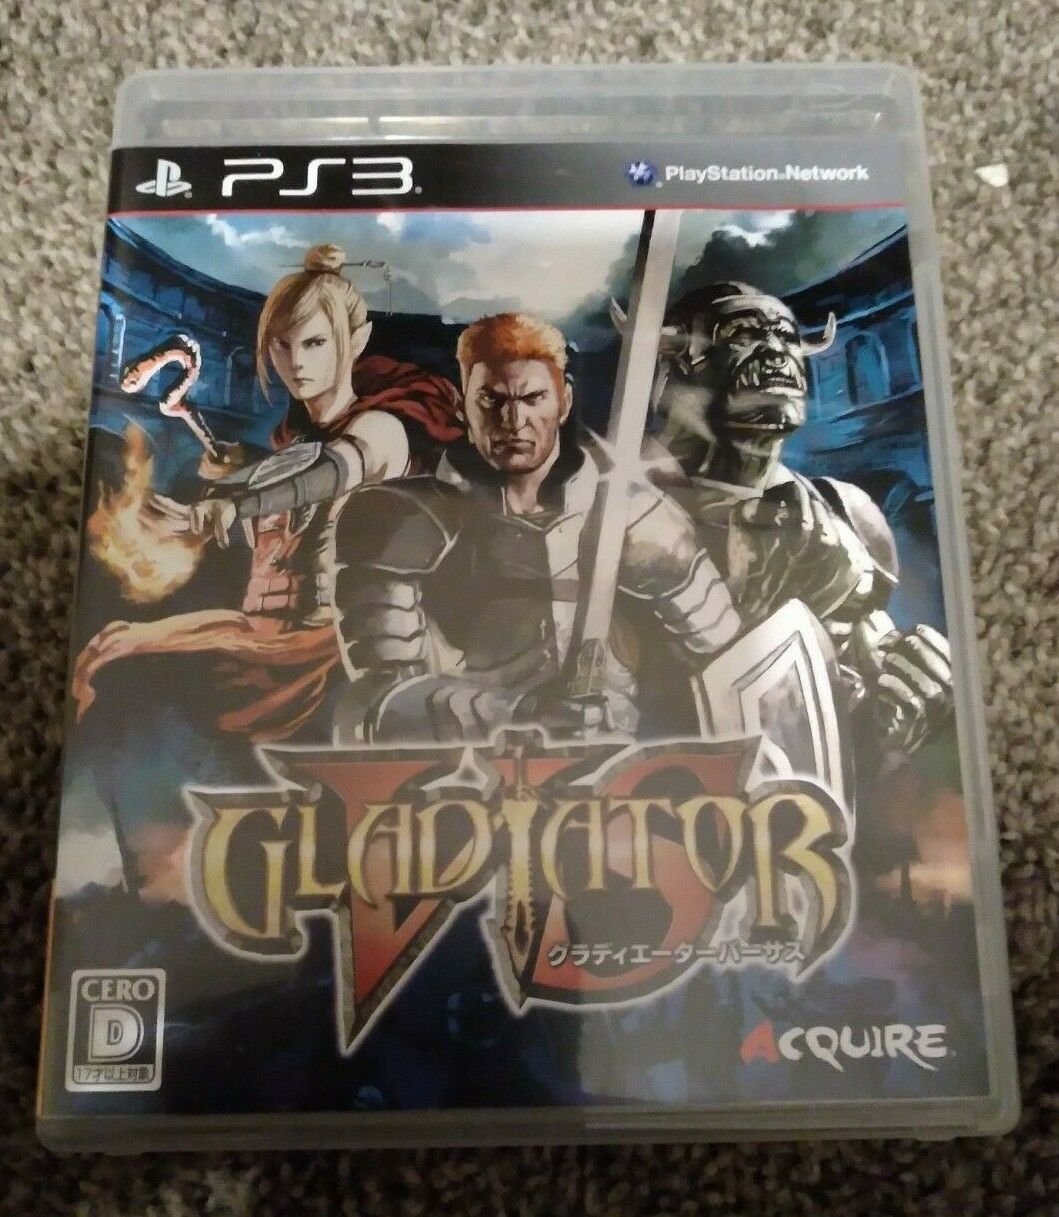 Gladiator Vs ( Sony PlayStation 3 ) With Manual Japan Import PS3